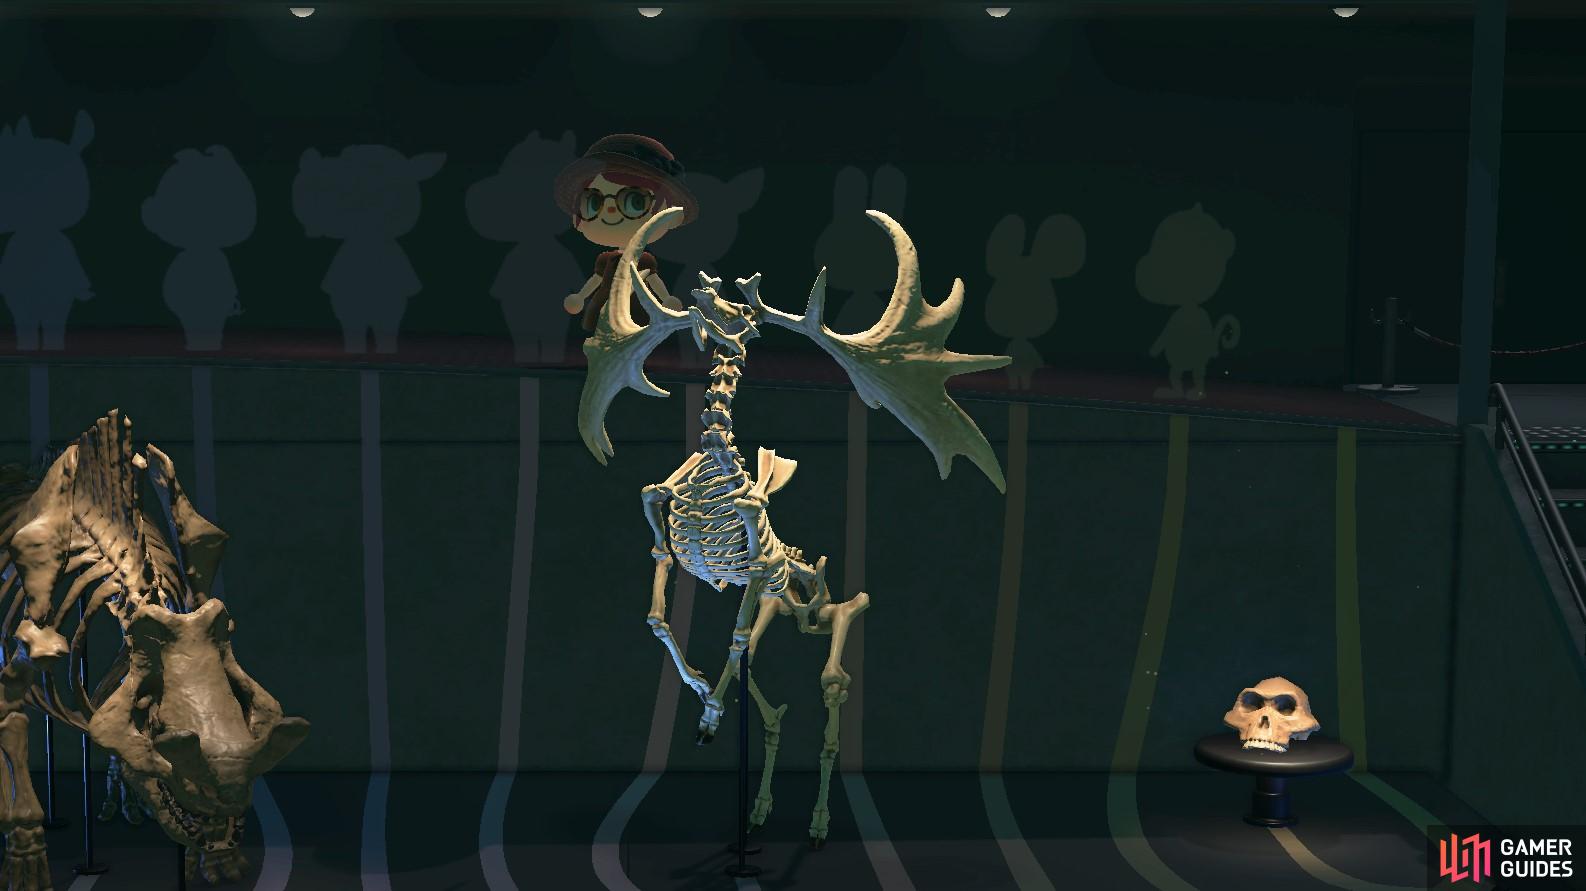 The Megaloceros is a part of the exhibition displaying ancestors of villagers. 